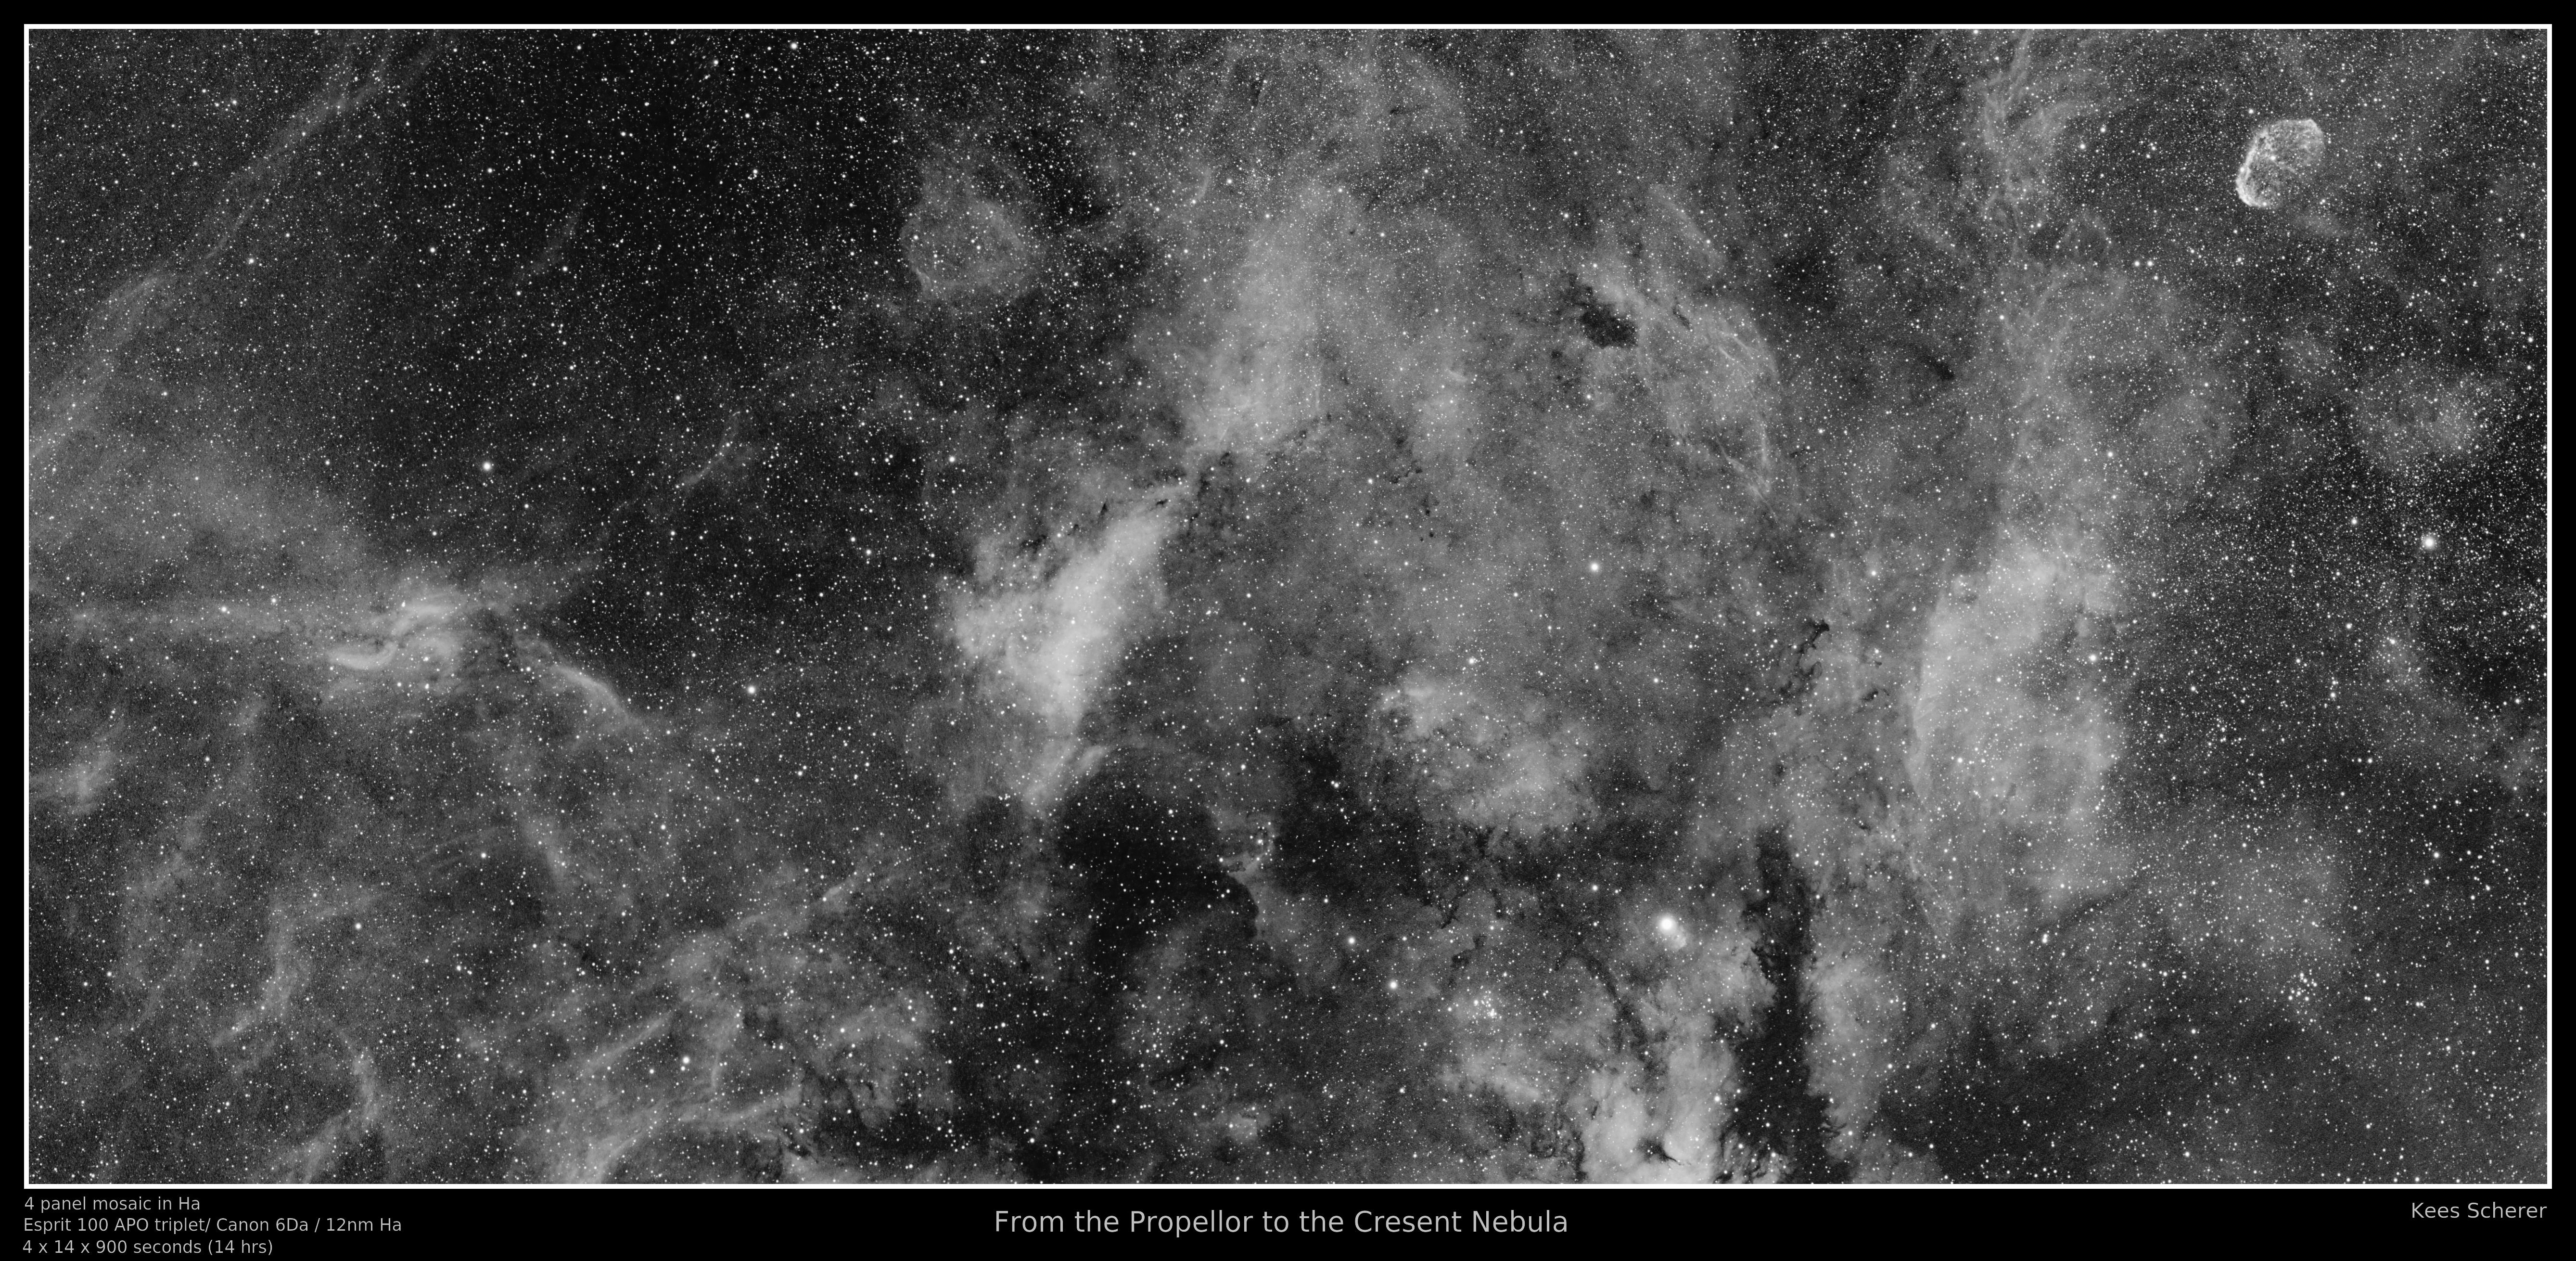 From the propellor to the cresent nebula, 4 panel mosaic in h-alpha. dslr image photo